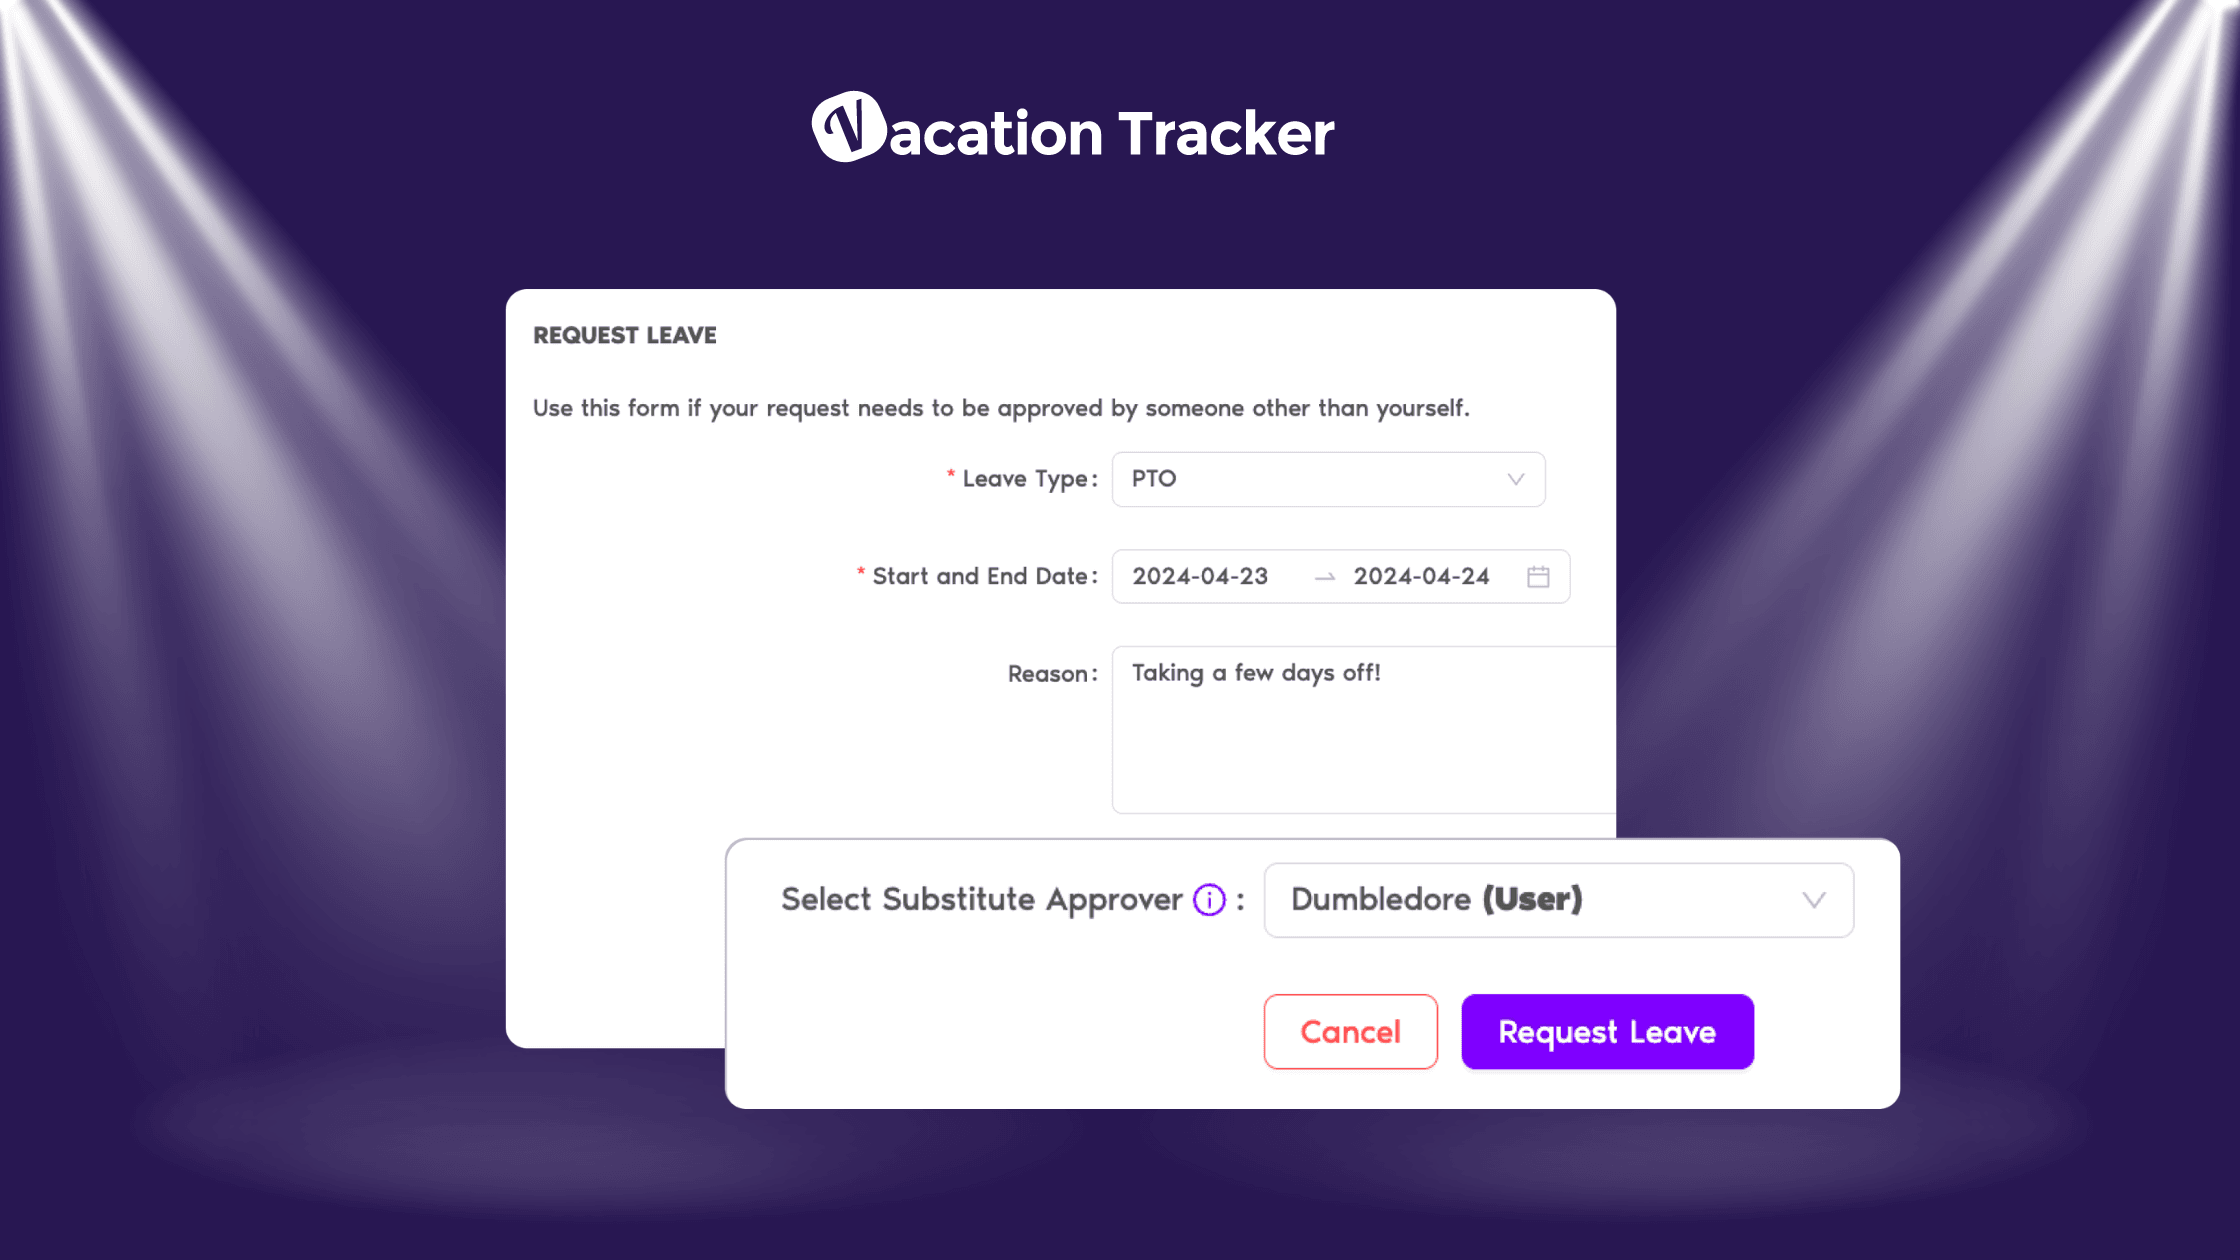 Understanding Substitute Approvers in Vacation Tracker